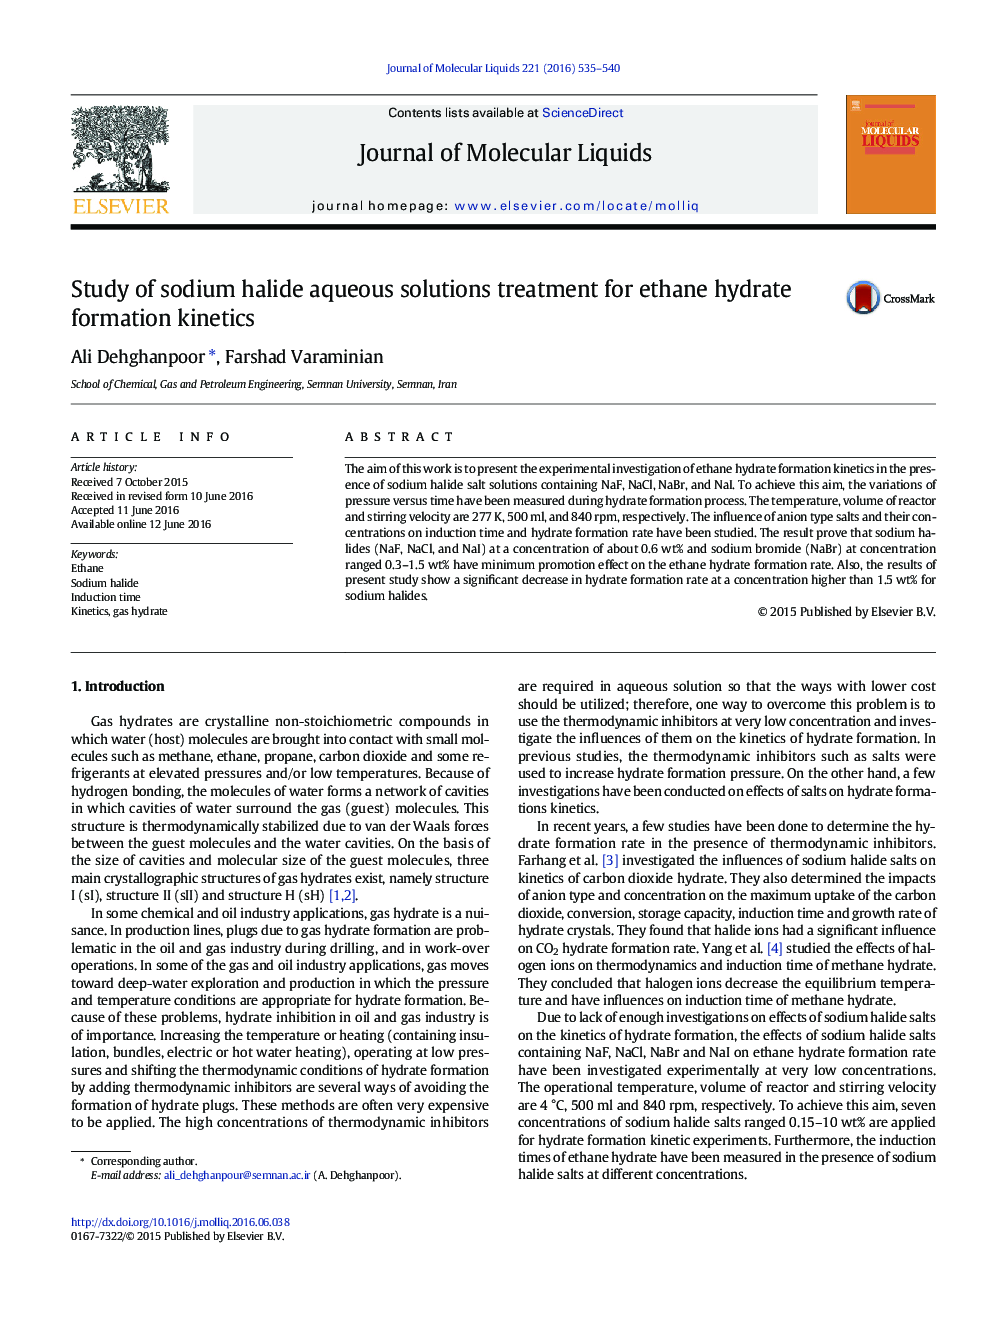 Study of sodium halide aqueous solutions treatment for ethane hydrate formation kinetics